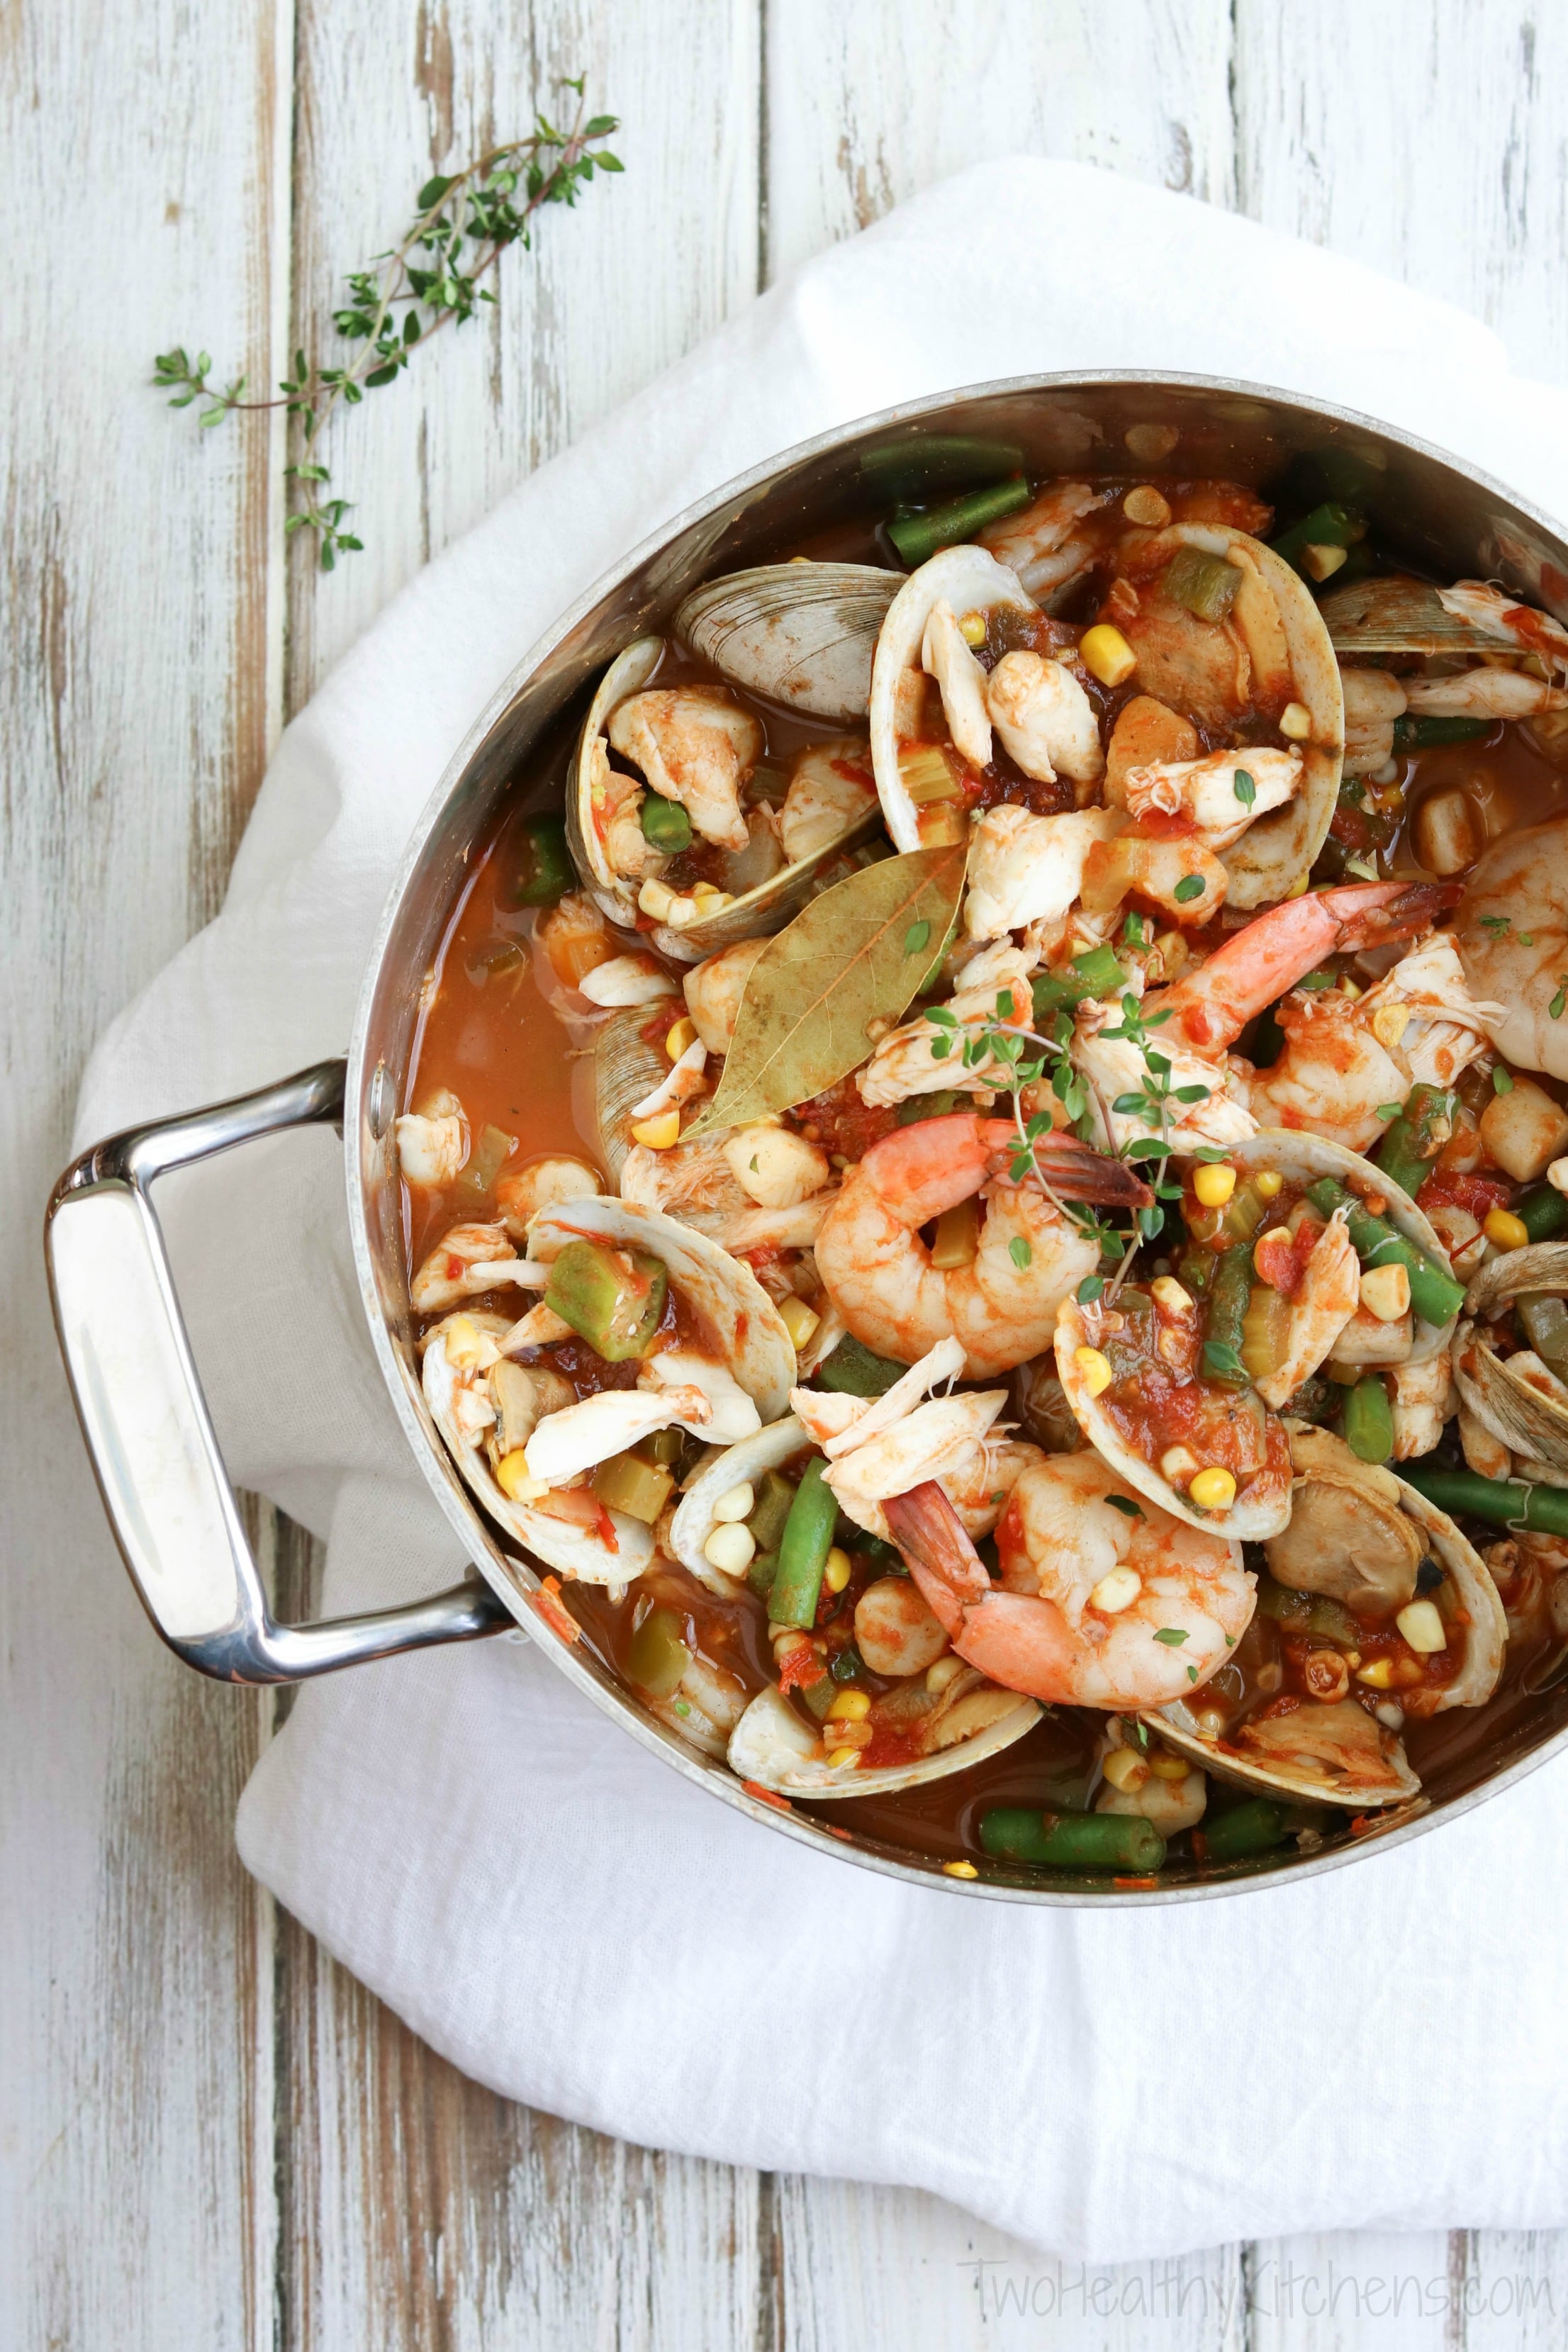 This Sea Island Seafood Stew is a showstopper for dinner parties! But with lots of make-ahead steps, it's also an easy family meal ... perfect when you need a little bit of beach in your life! It’s a mainstay on the menu at the hugely popular Skull Creek Boathouse in Hilton Head, South Carolina. | www.TwoHealthyKitchens.com